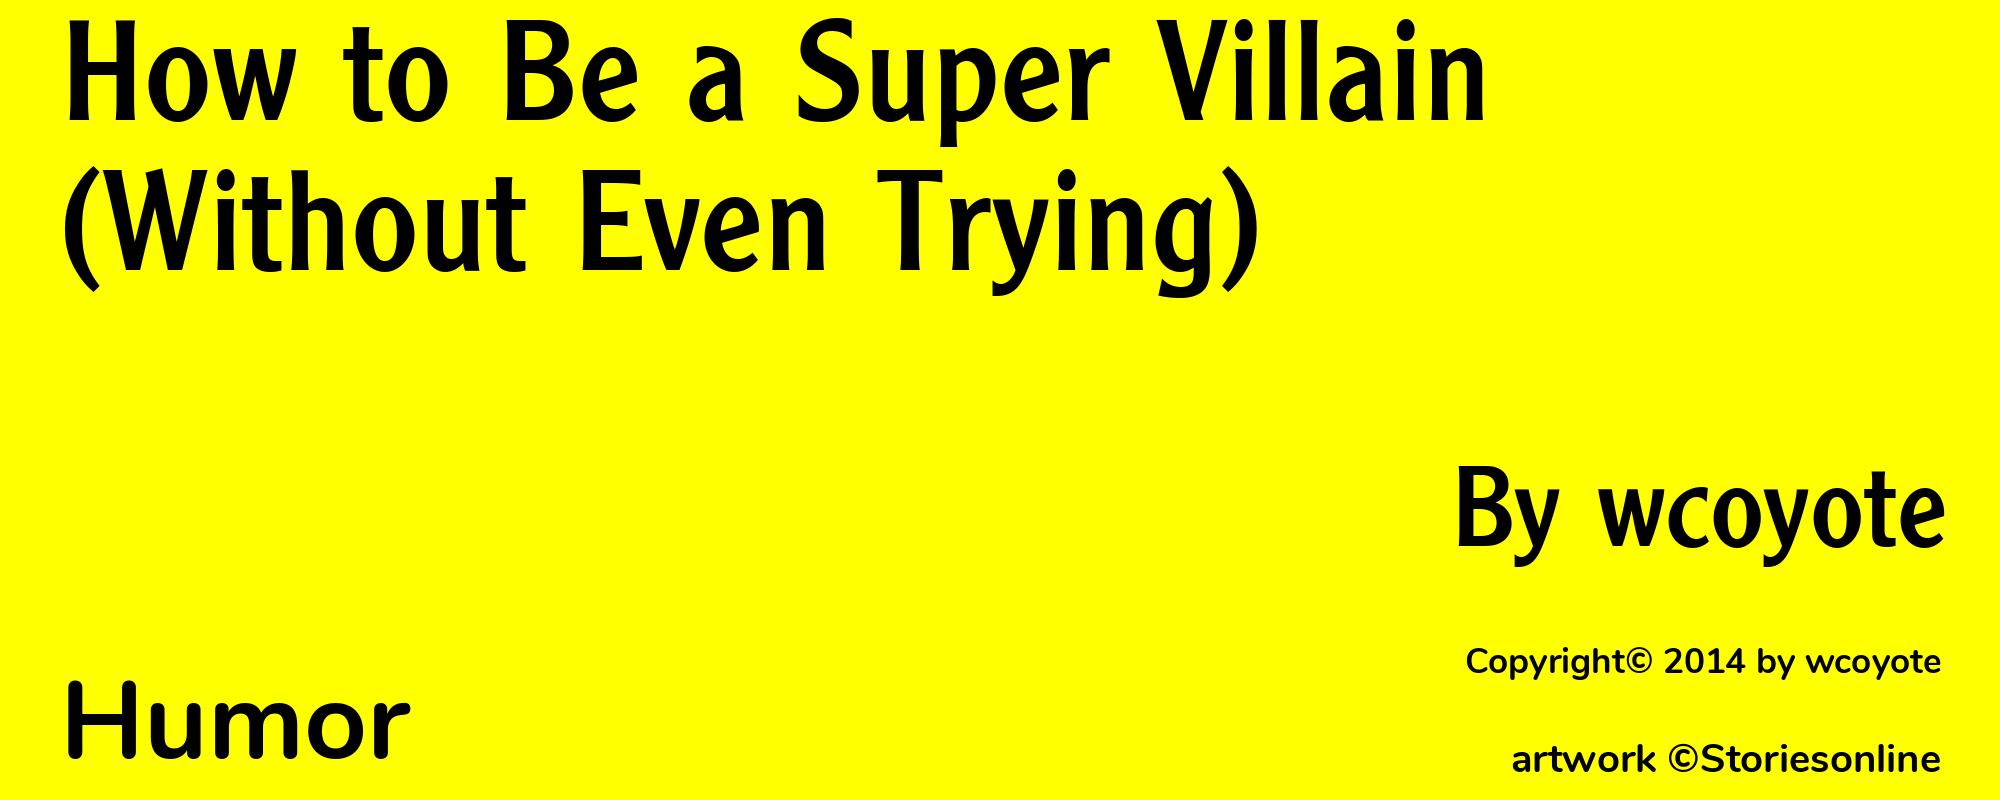 How to Be a Super Villain (Without Even Trying) - Cover